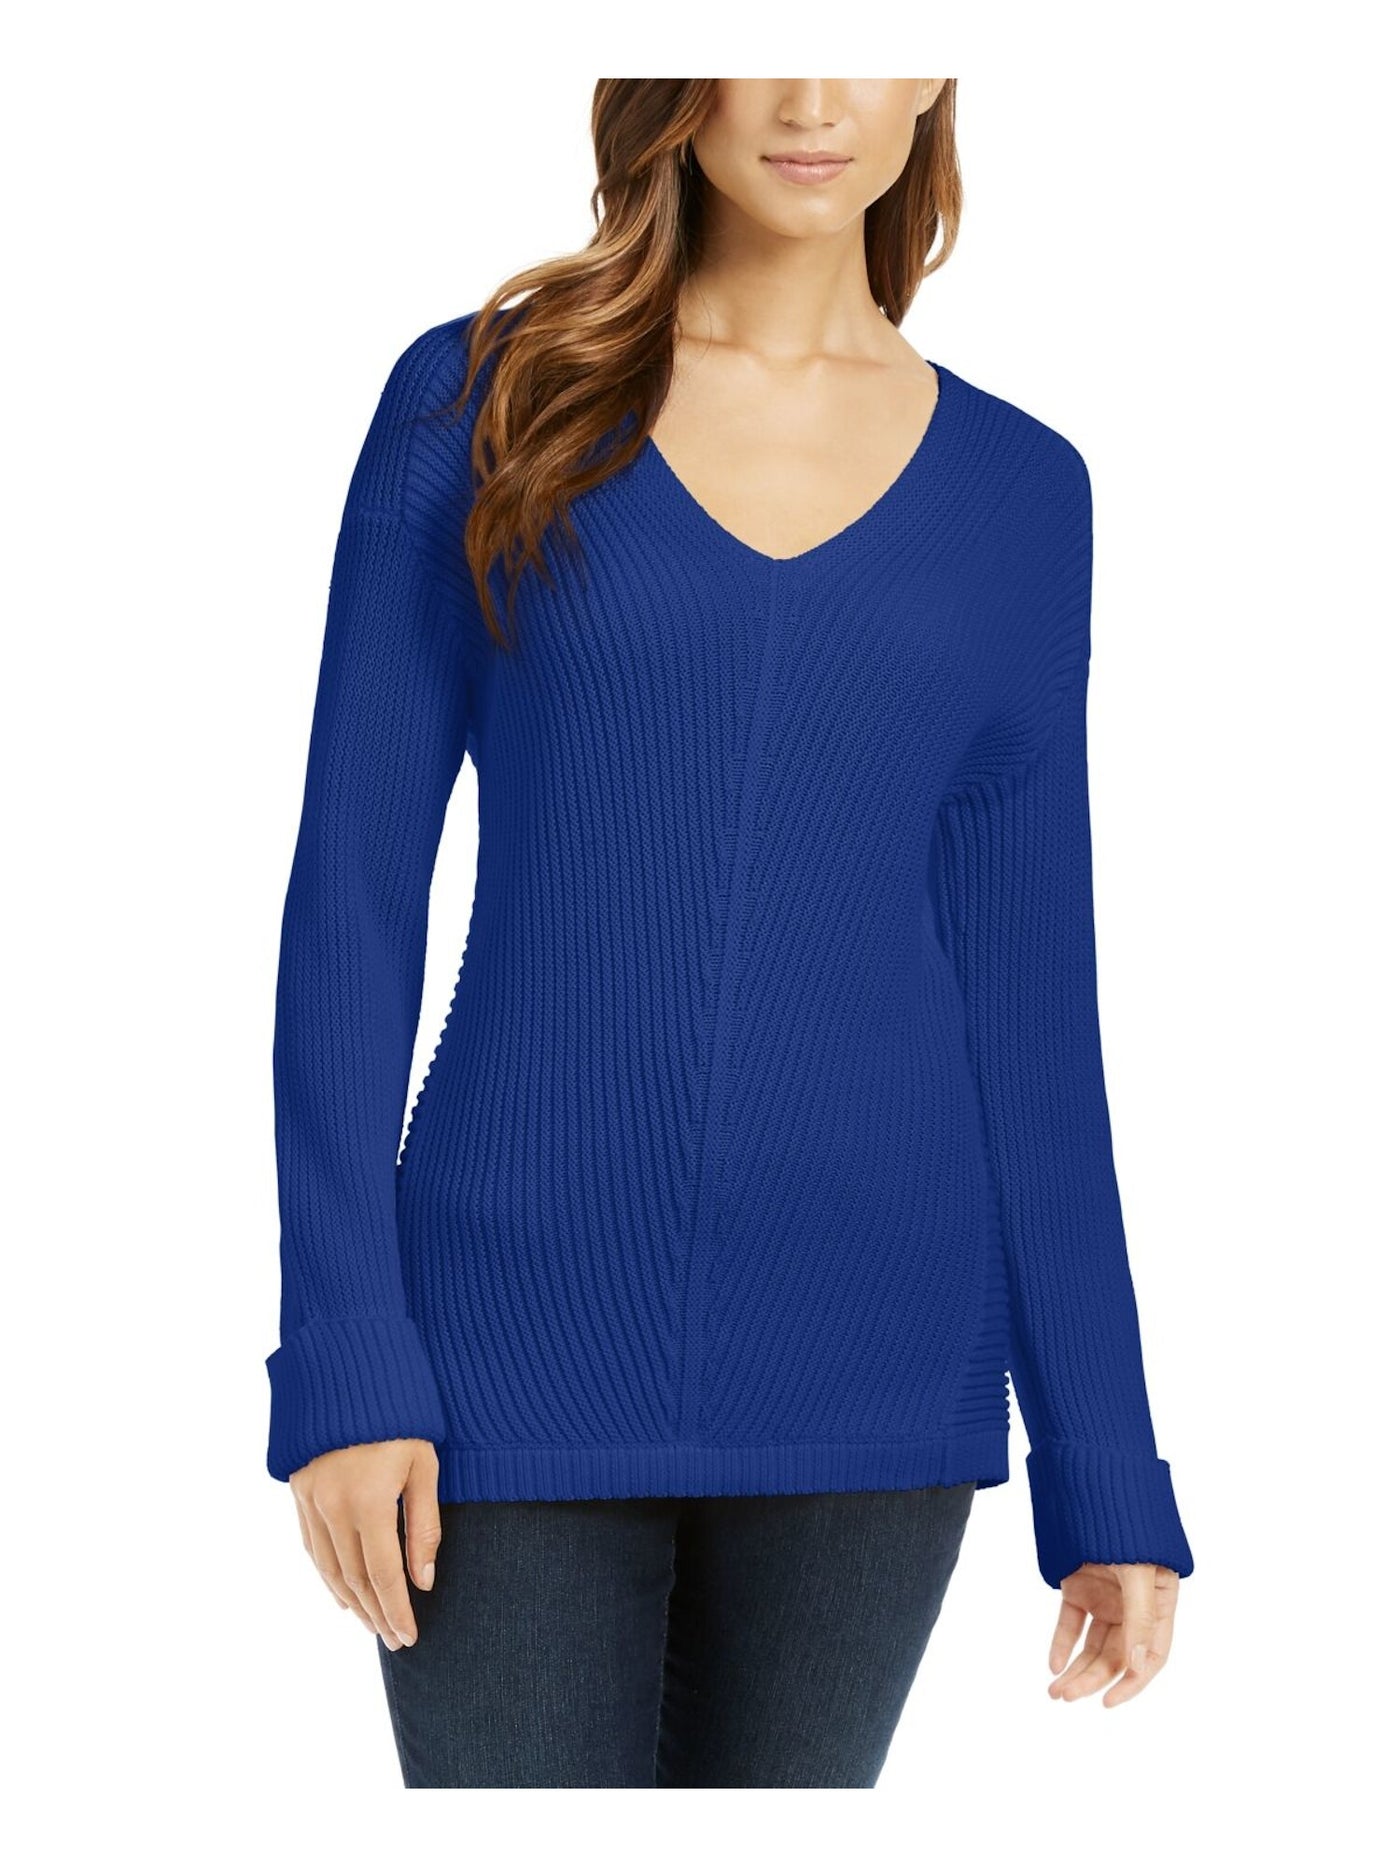 CHARTER CLUB Womens Blue Long Sleeve V Neck Top Size: XS